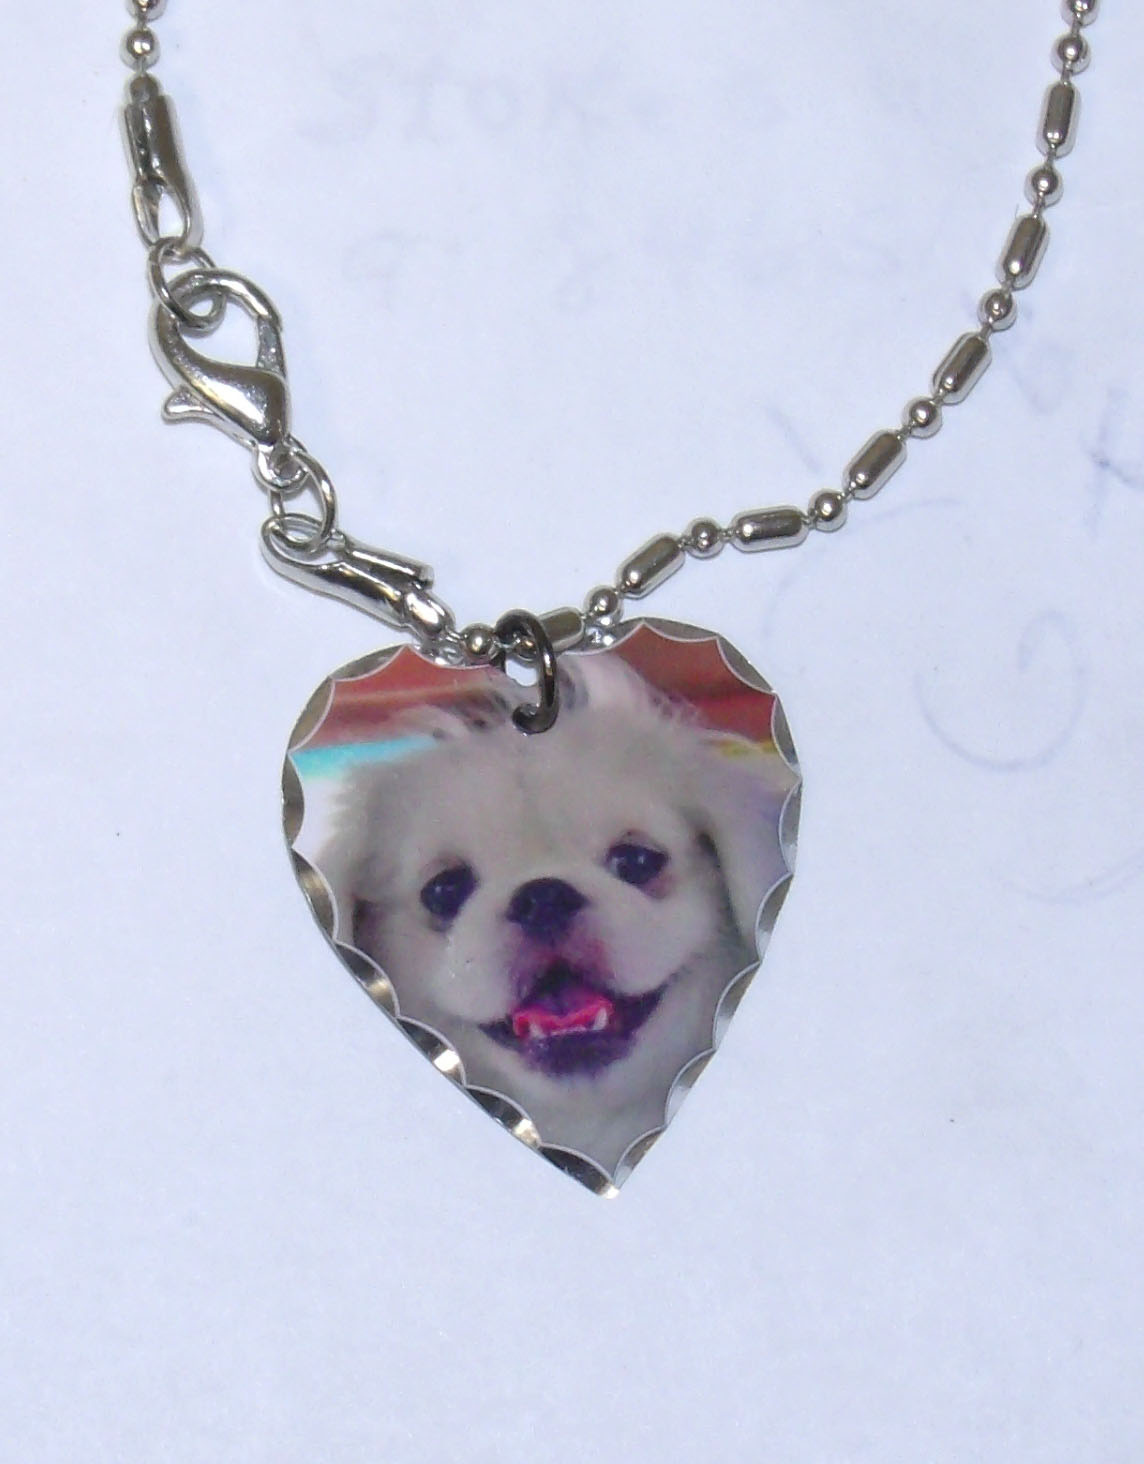 Gizmo Neclace made with sublimation printing